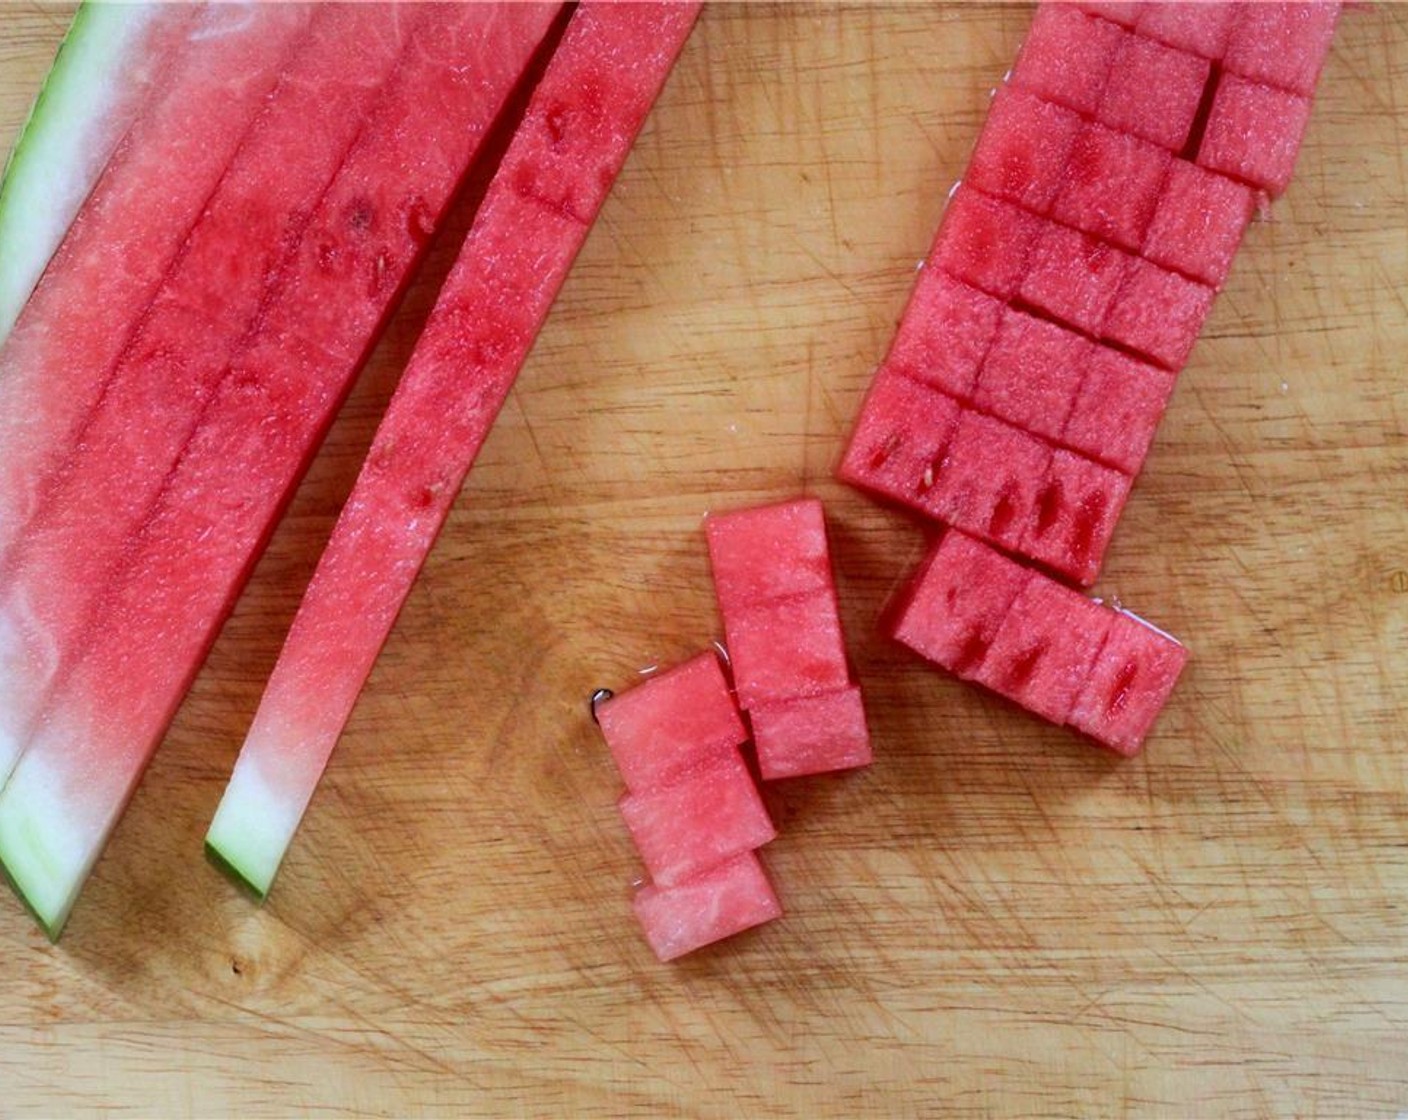 step 1 To dice the Seedless Watermelon (1/2), slice the half into two quarters, and then slice off 1/2" crescent-shaped slabs. Slice the slabs into 1/2" strips, and then into cubes.